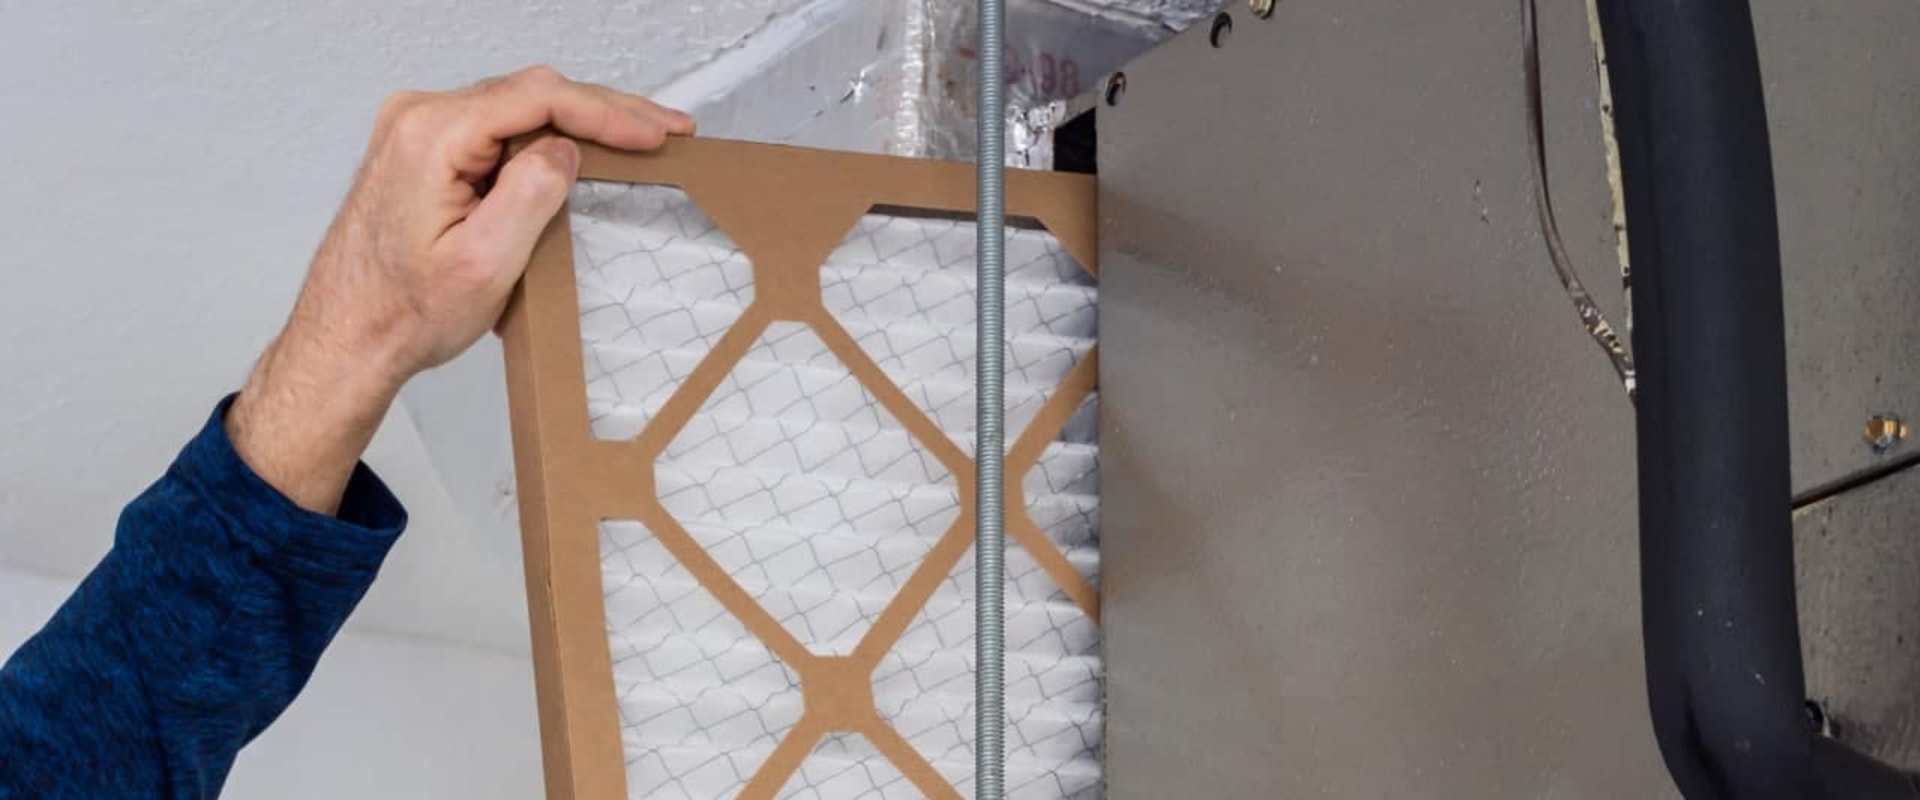 How Often Should You Replace a 20x25x4 Air Filter?